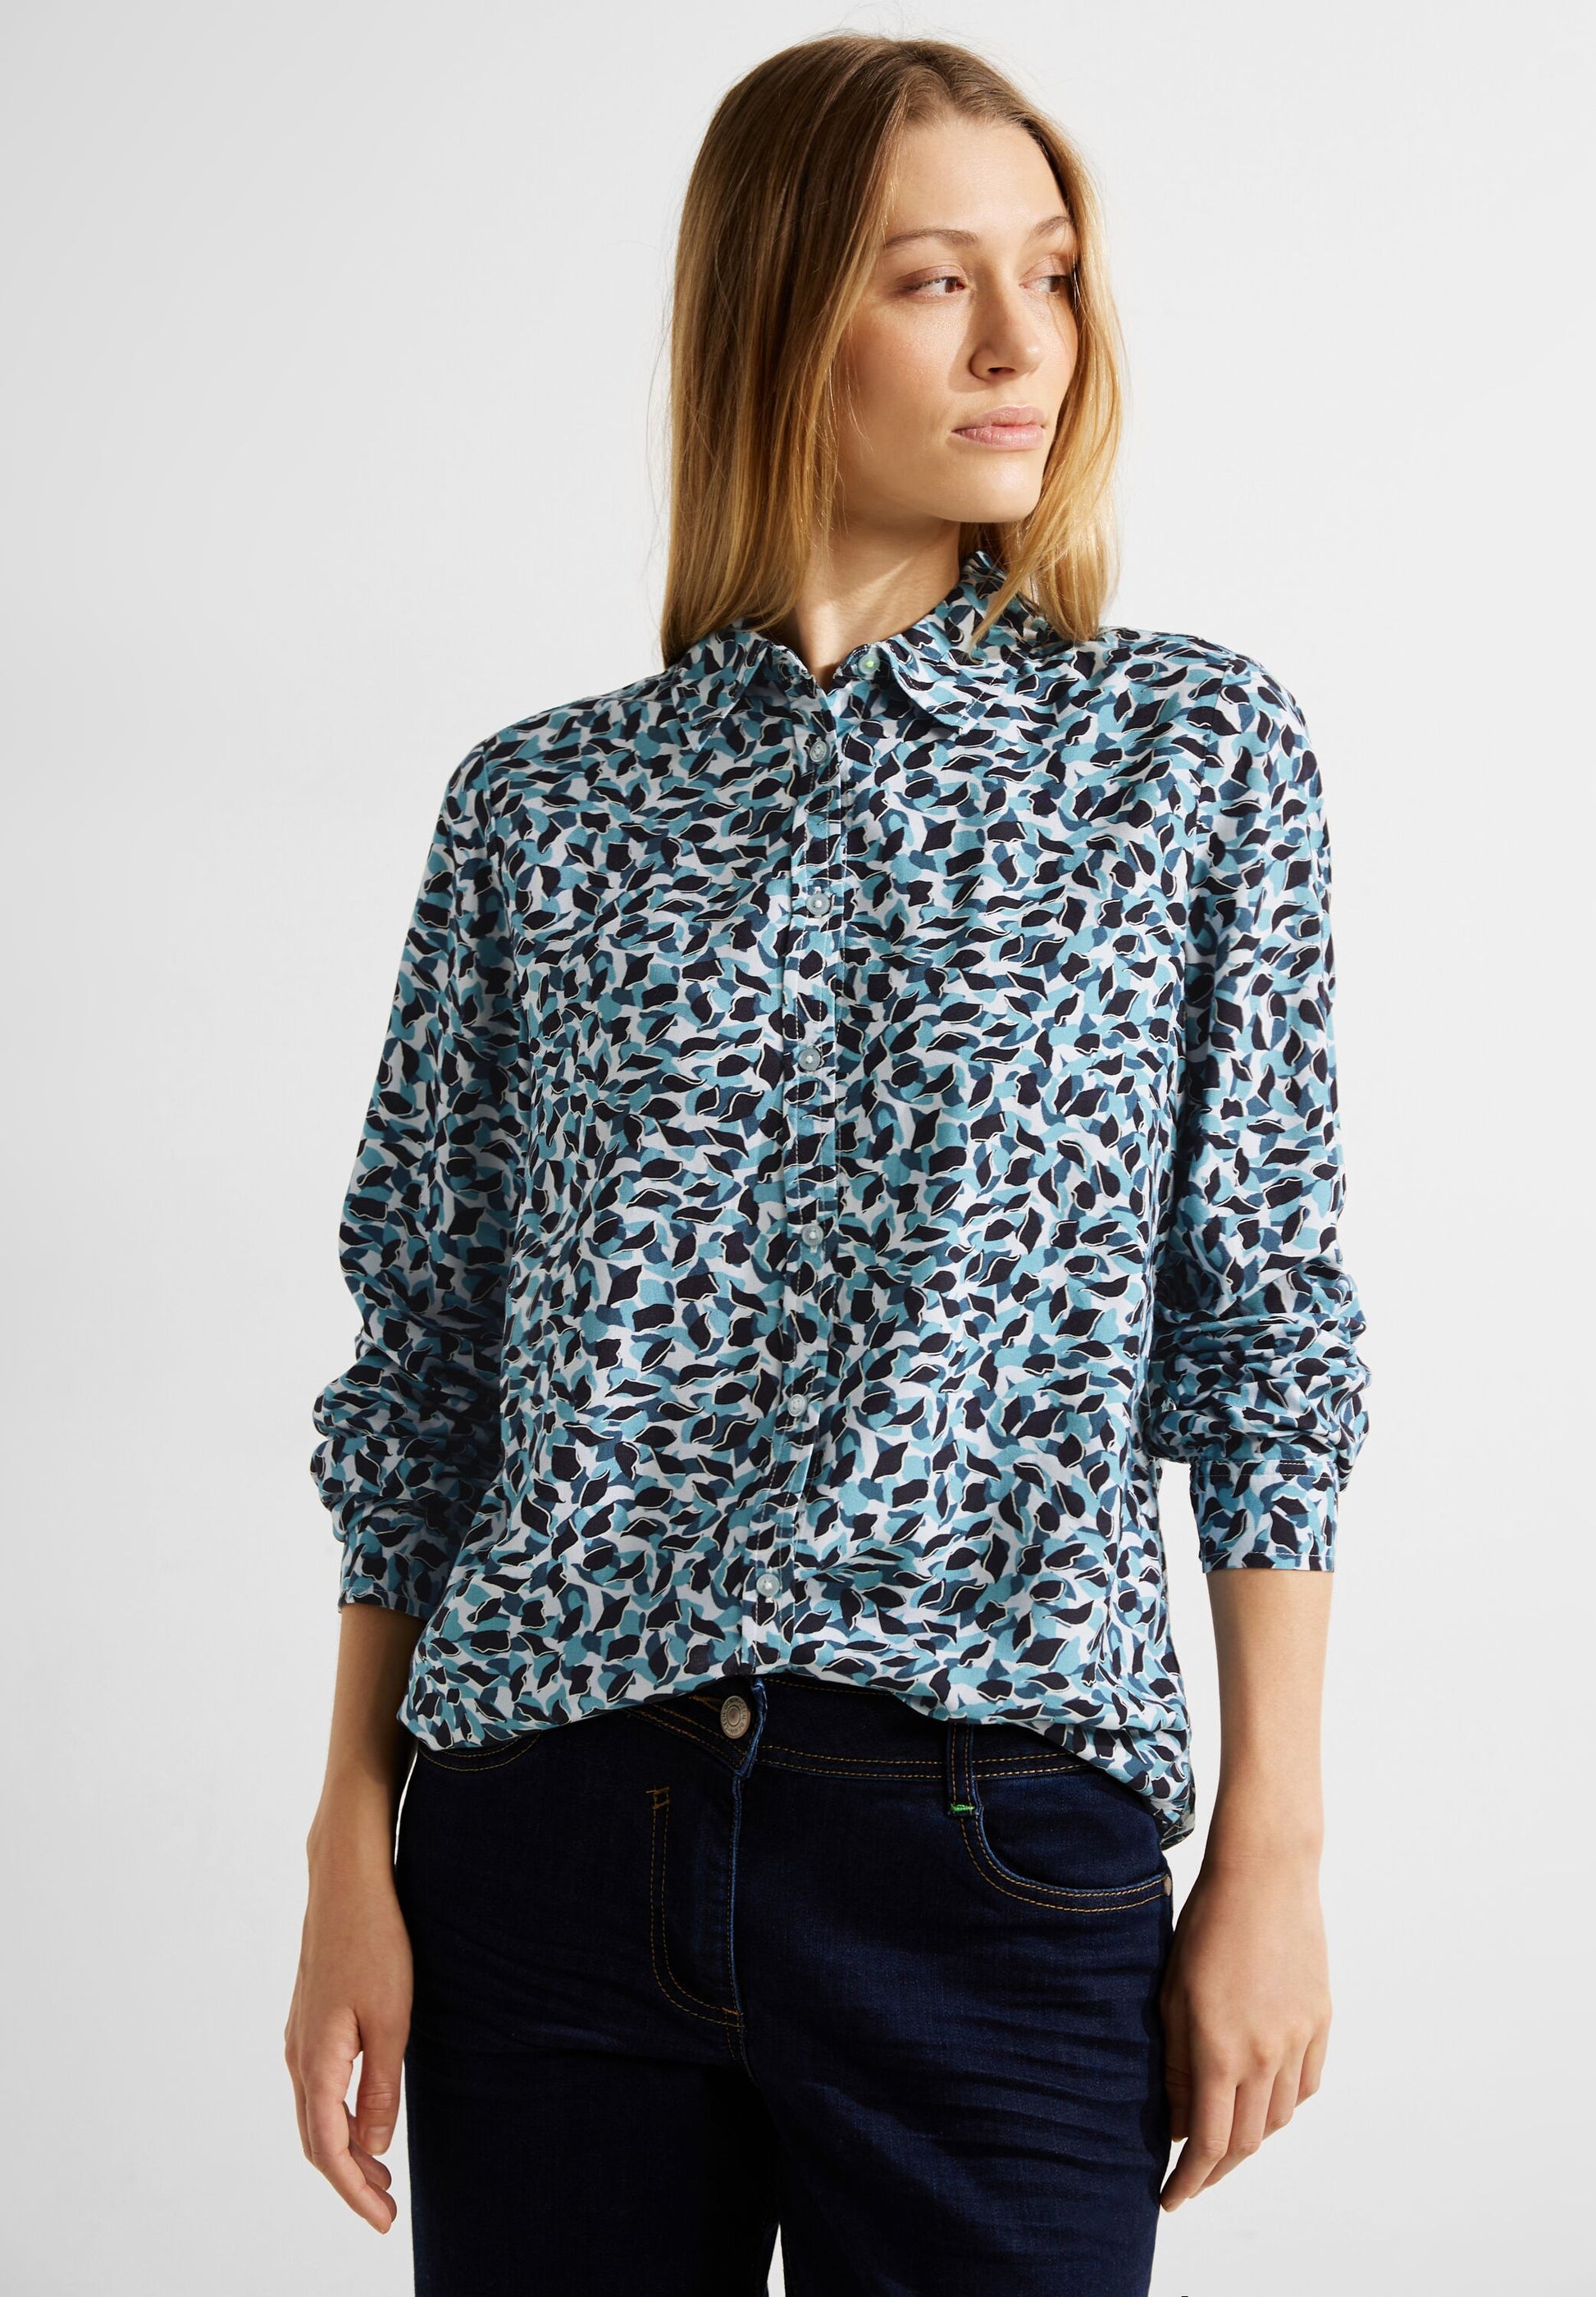 CECIL - Bluse mit grafischem Print - Farbe: strong petrol blue – TWISTY Mode